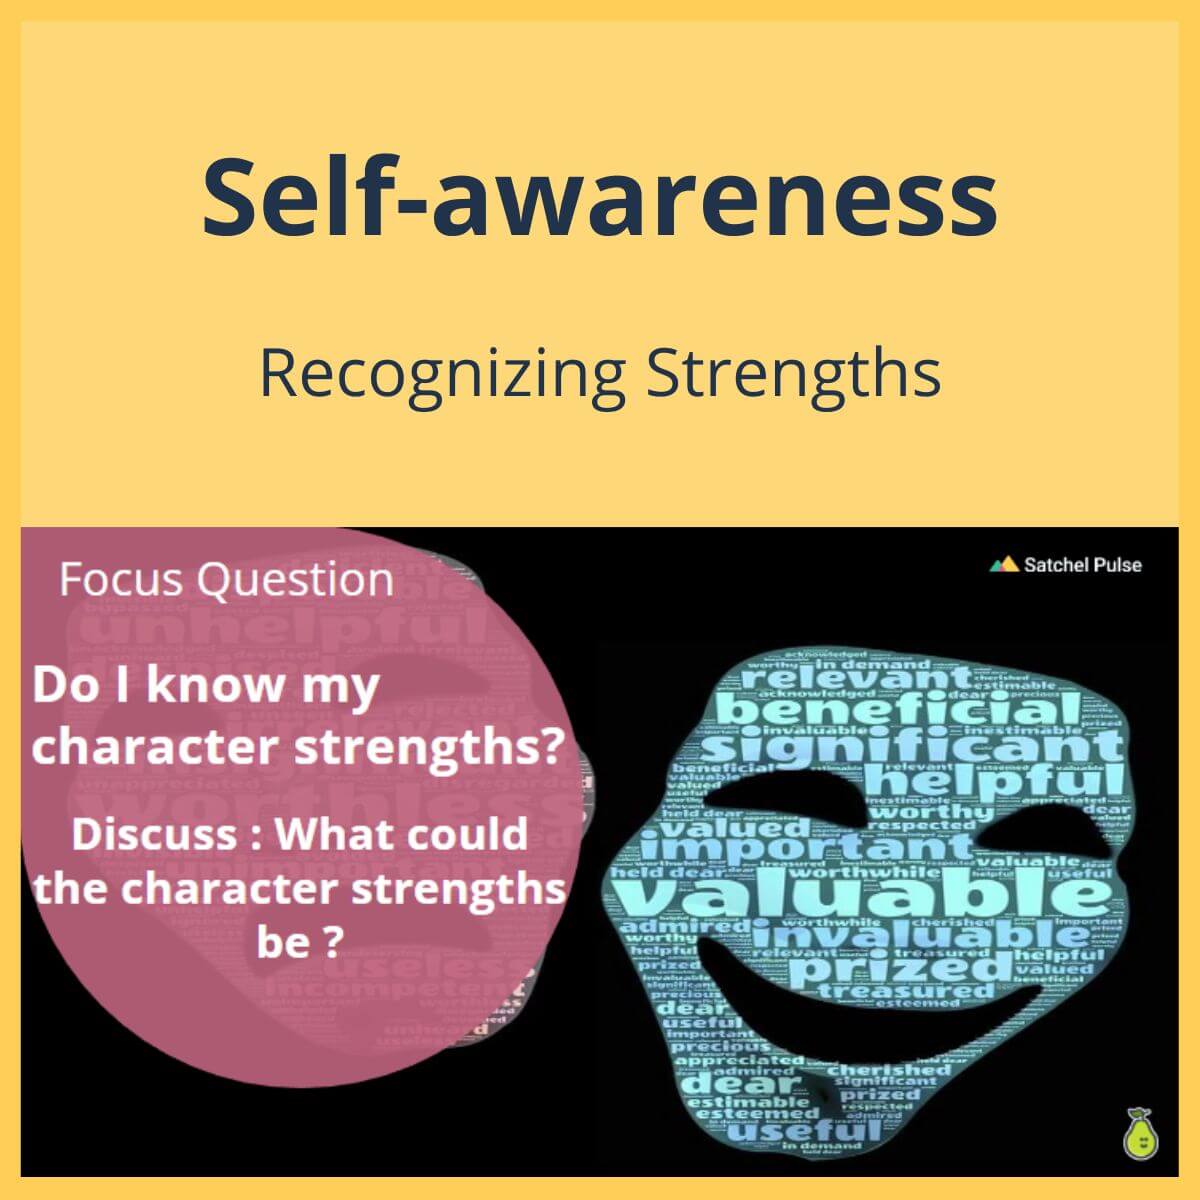 SEL Lesson focusing on Recognizing Strengths to use in your classroom as one of your SEL activities for Self-Awareness